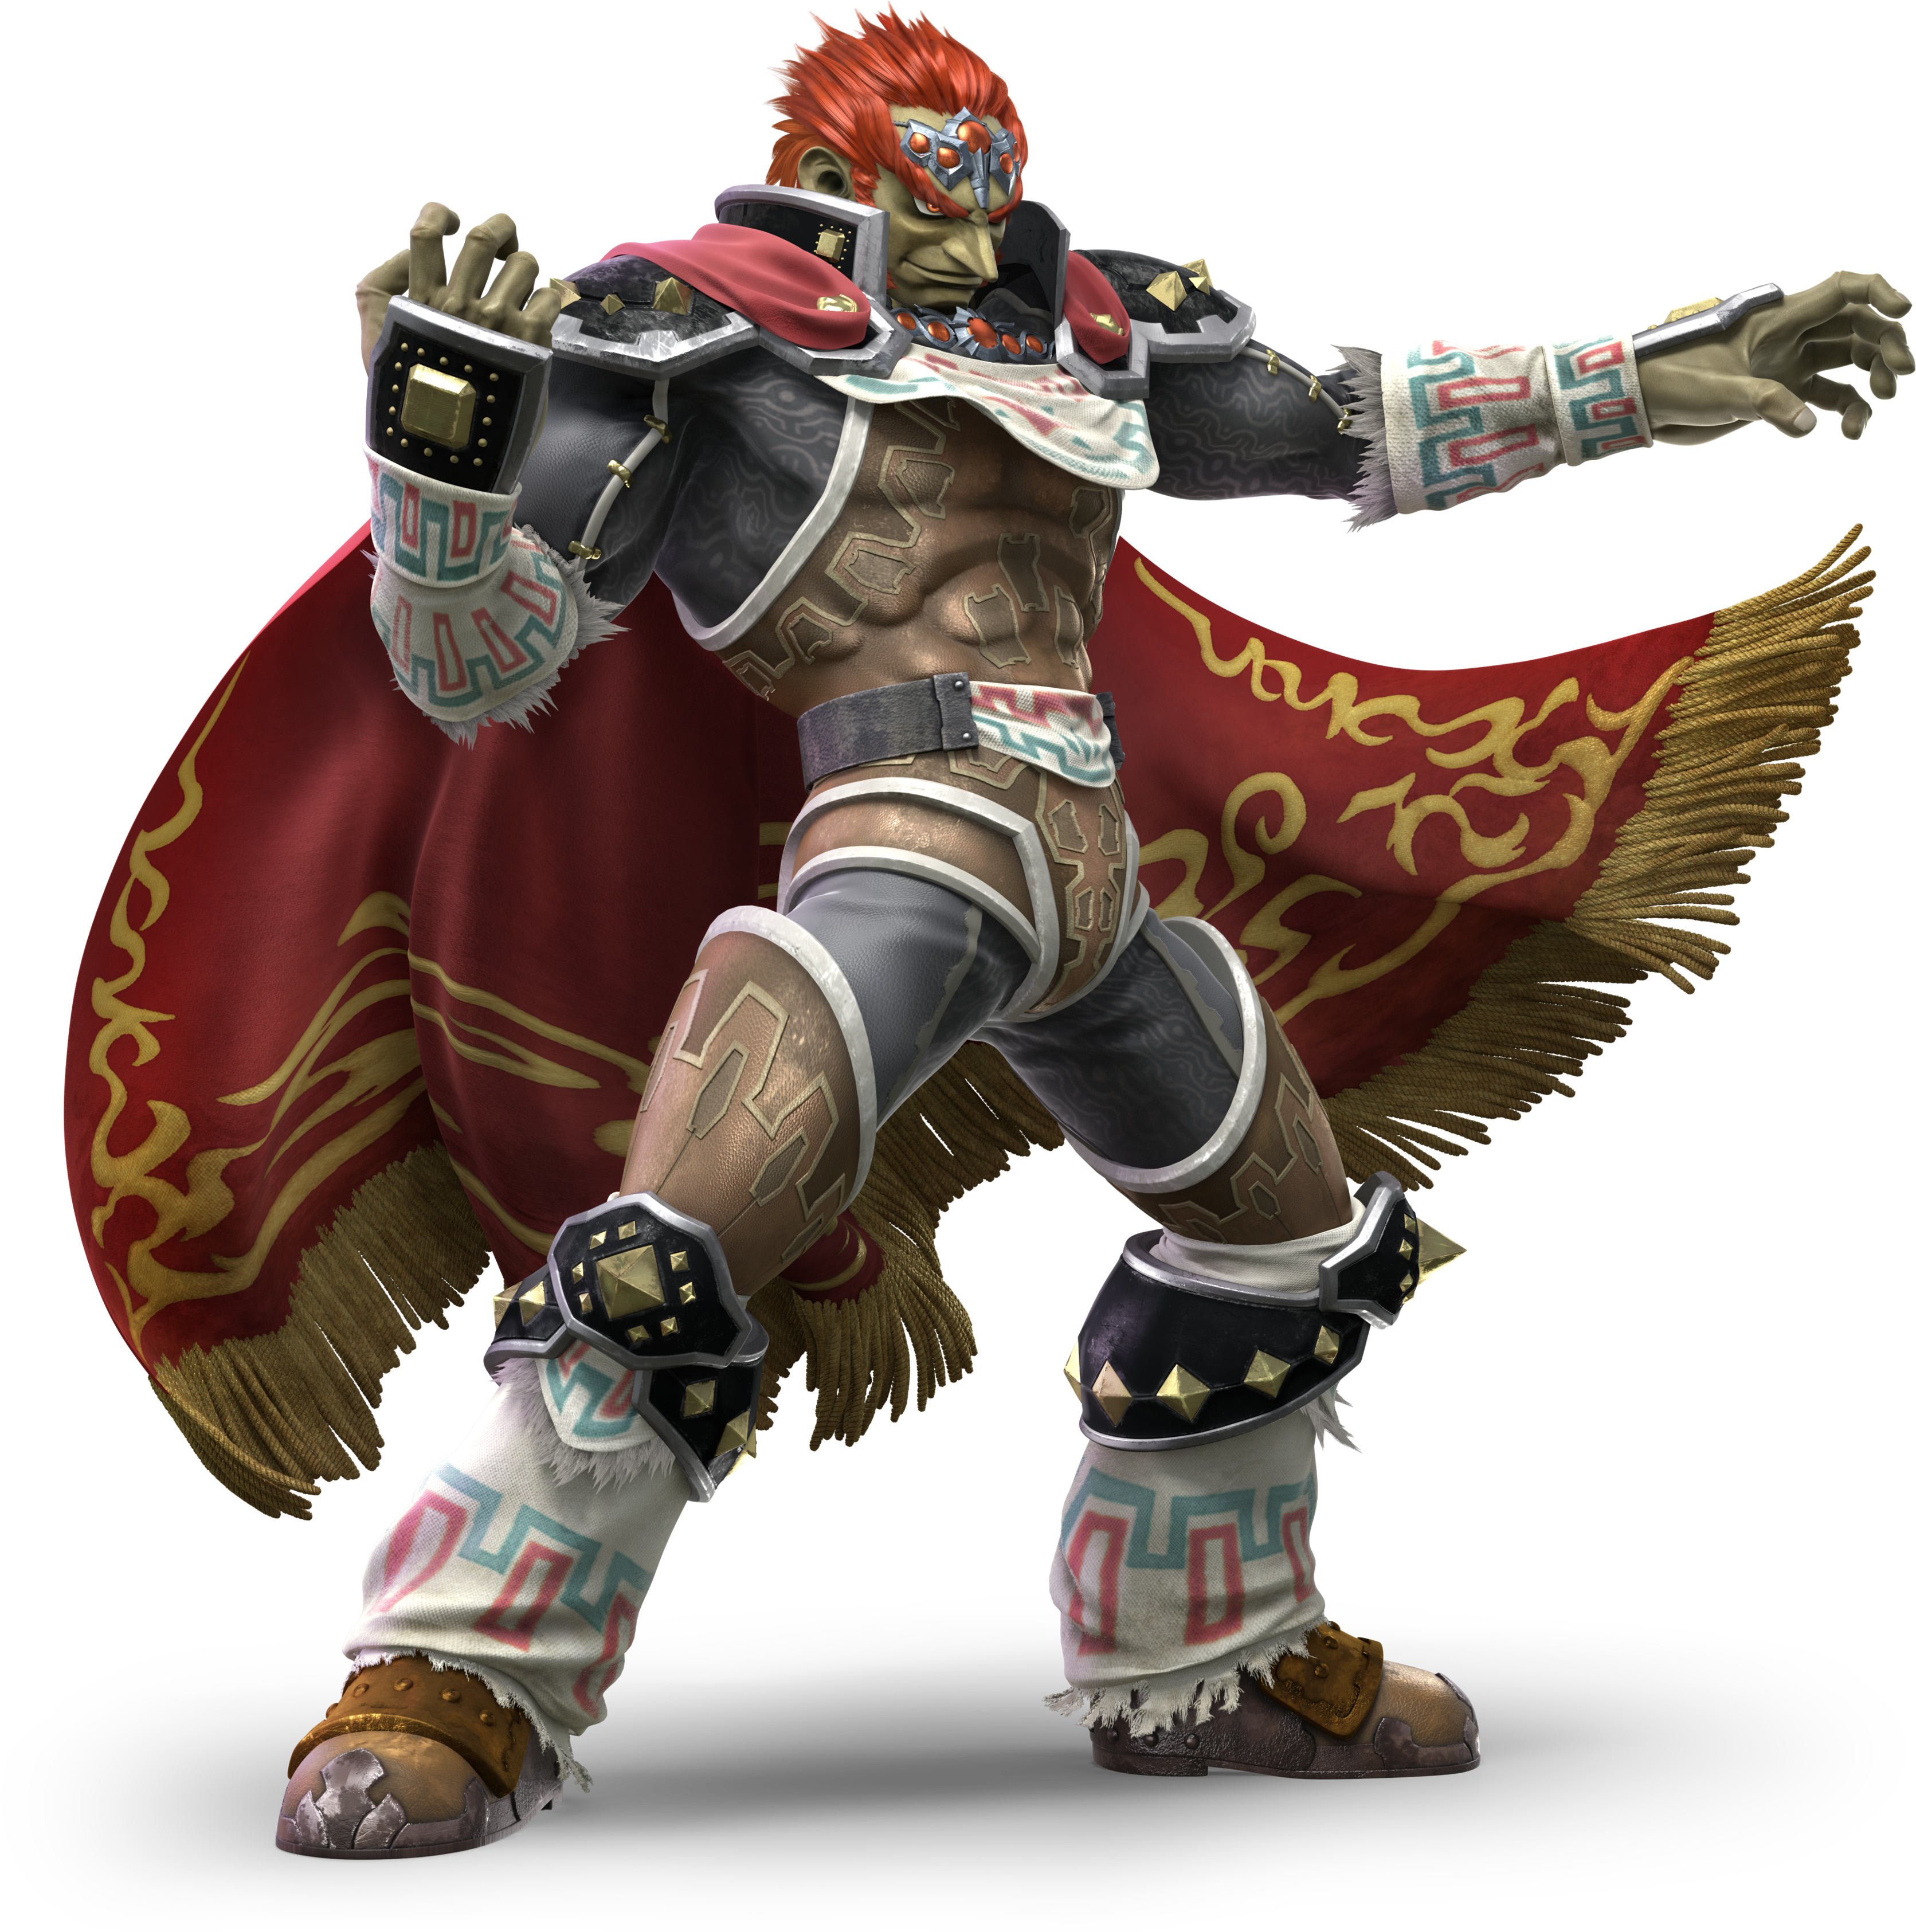 I know he missed his chance, but here's some Smash recolors/ alt